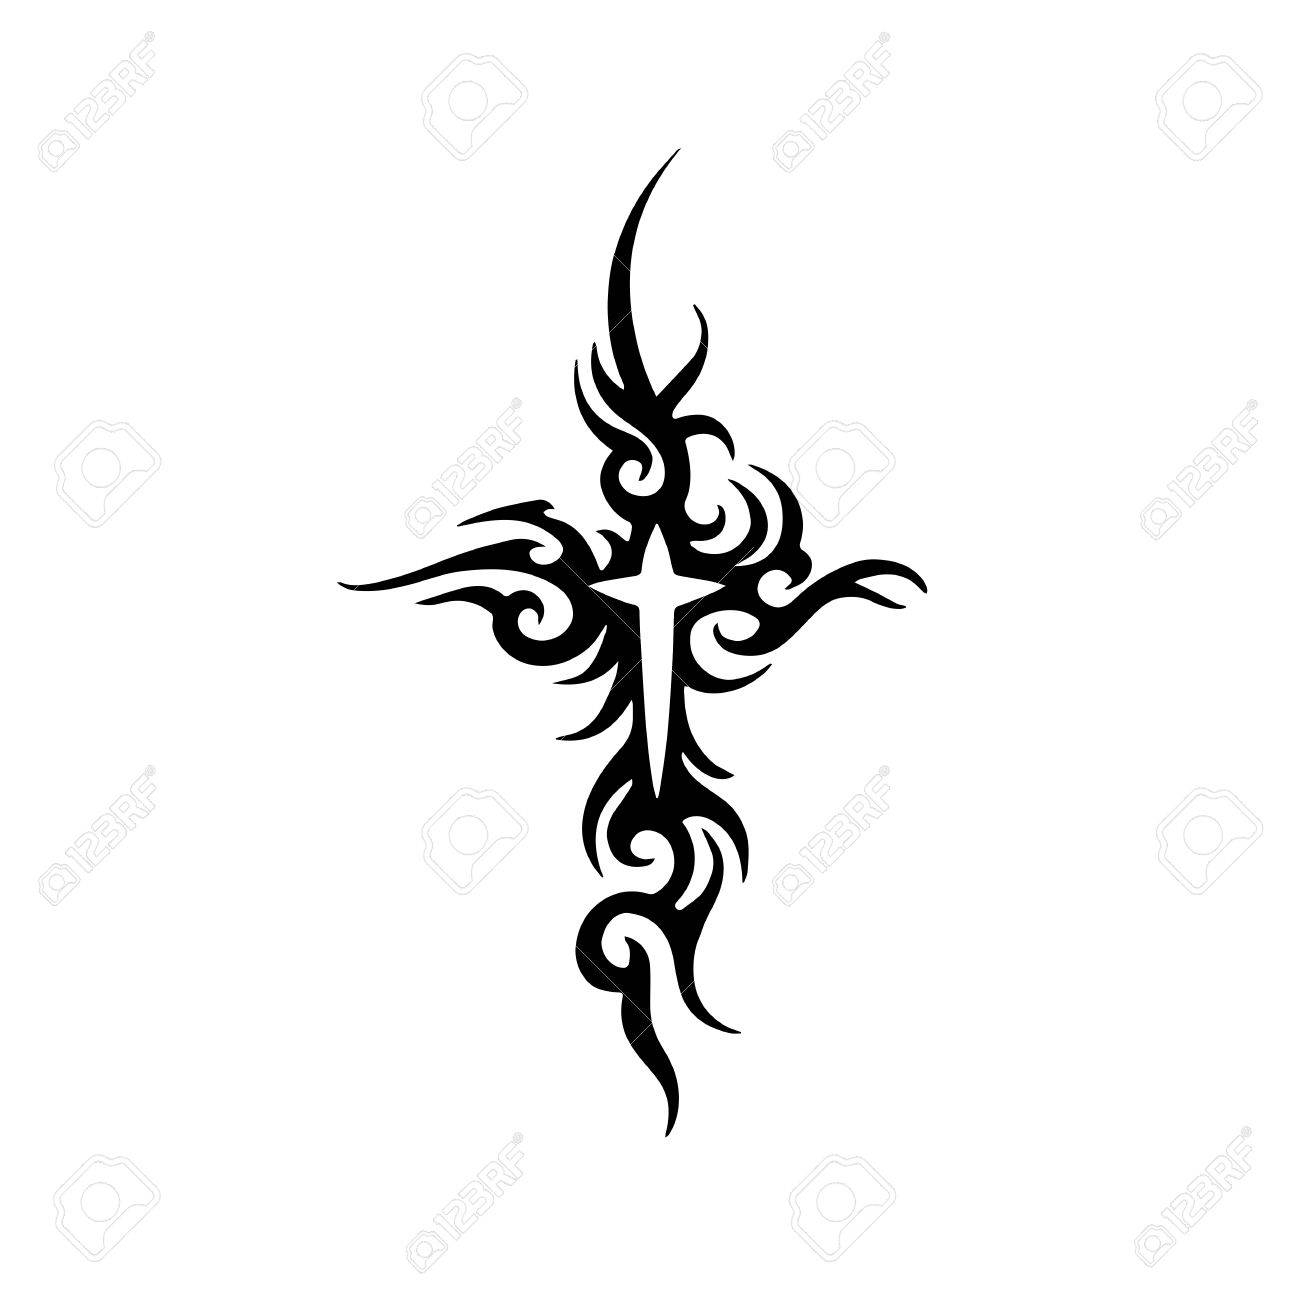 Tribal Cross Tattoo Design Royalty Free Cliparts Vectors And Stock pertaining to dimensions 1300 X 1300